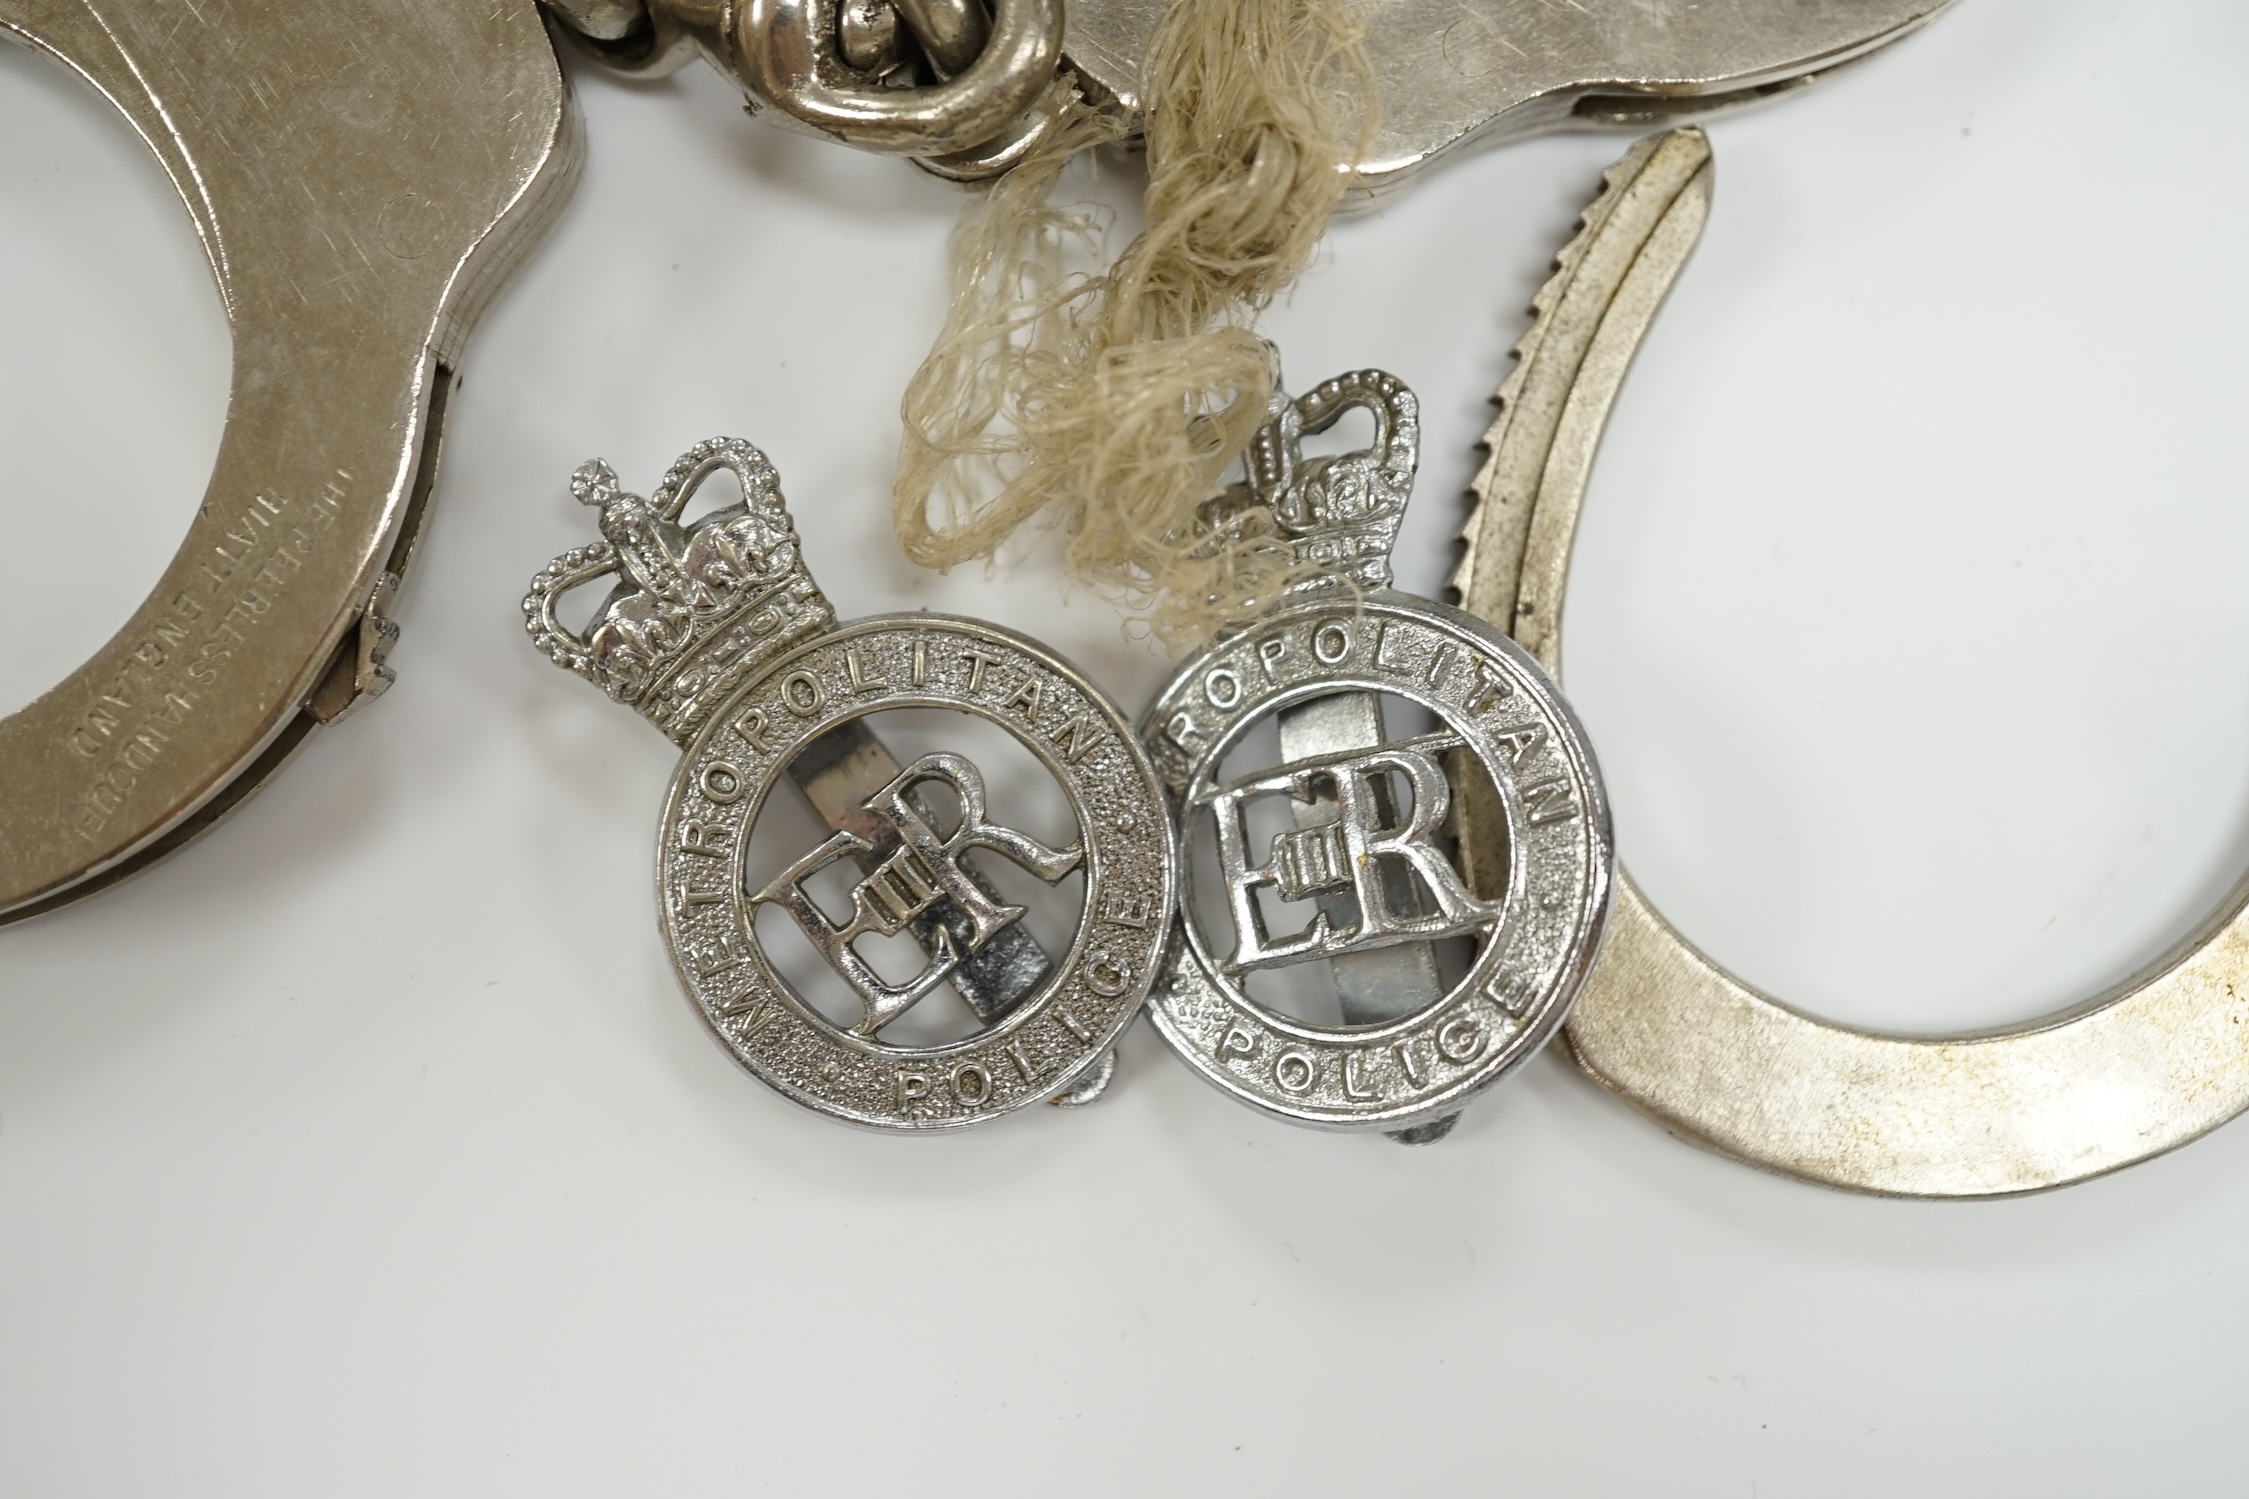 Three handcuffs, two with keys and two Metropolitan Police badges